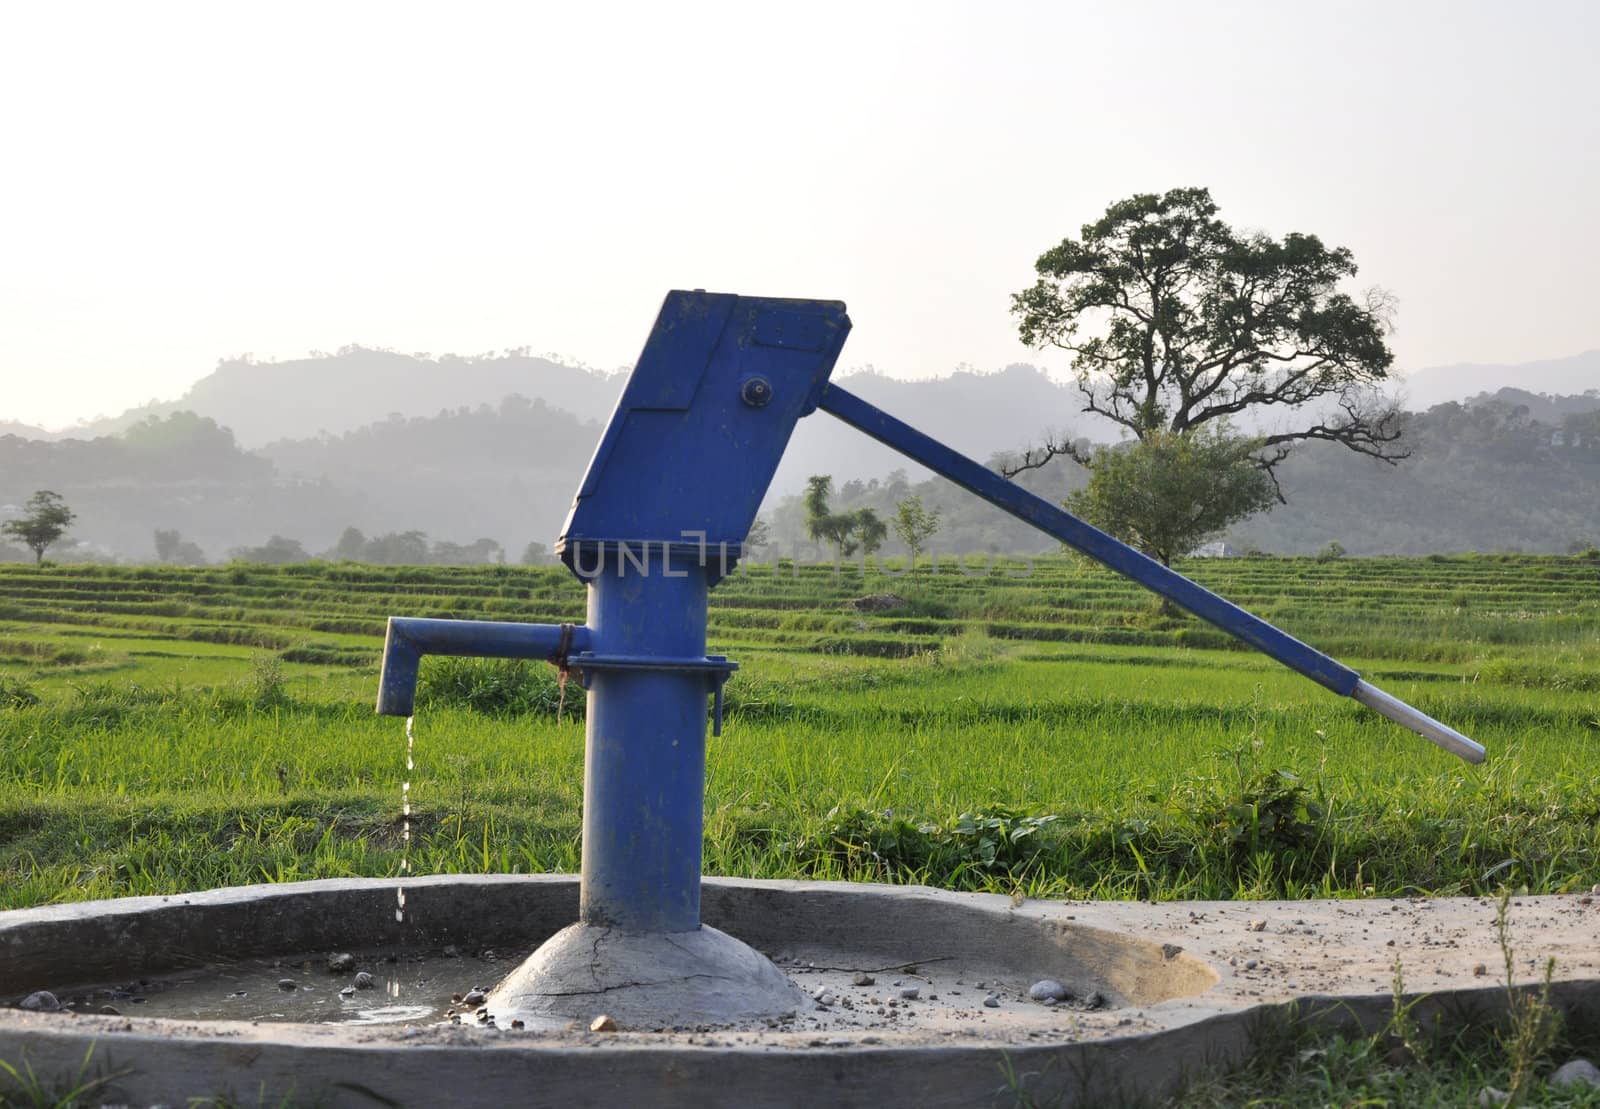 A Water Pump in a Beautiful Field in India by kdreams02